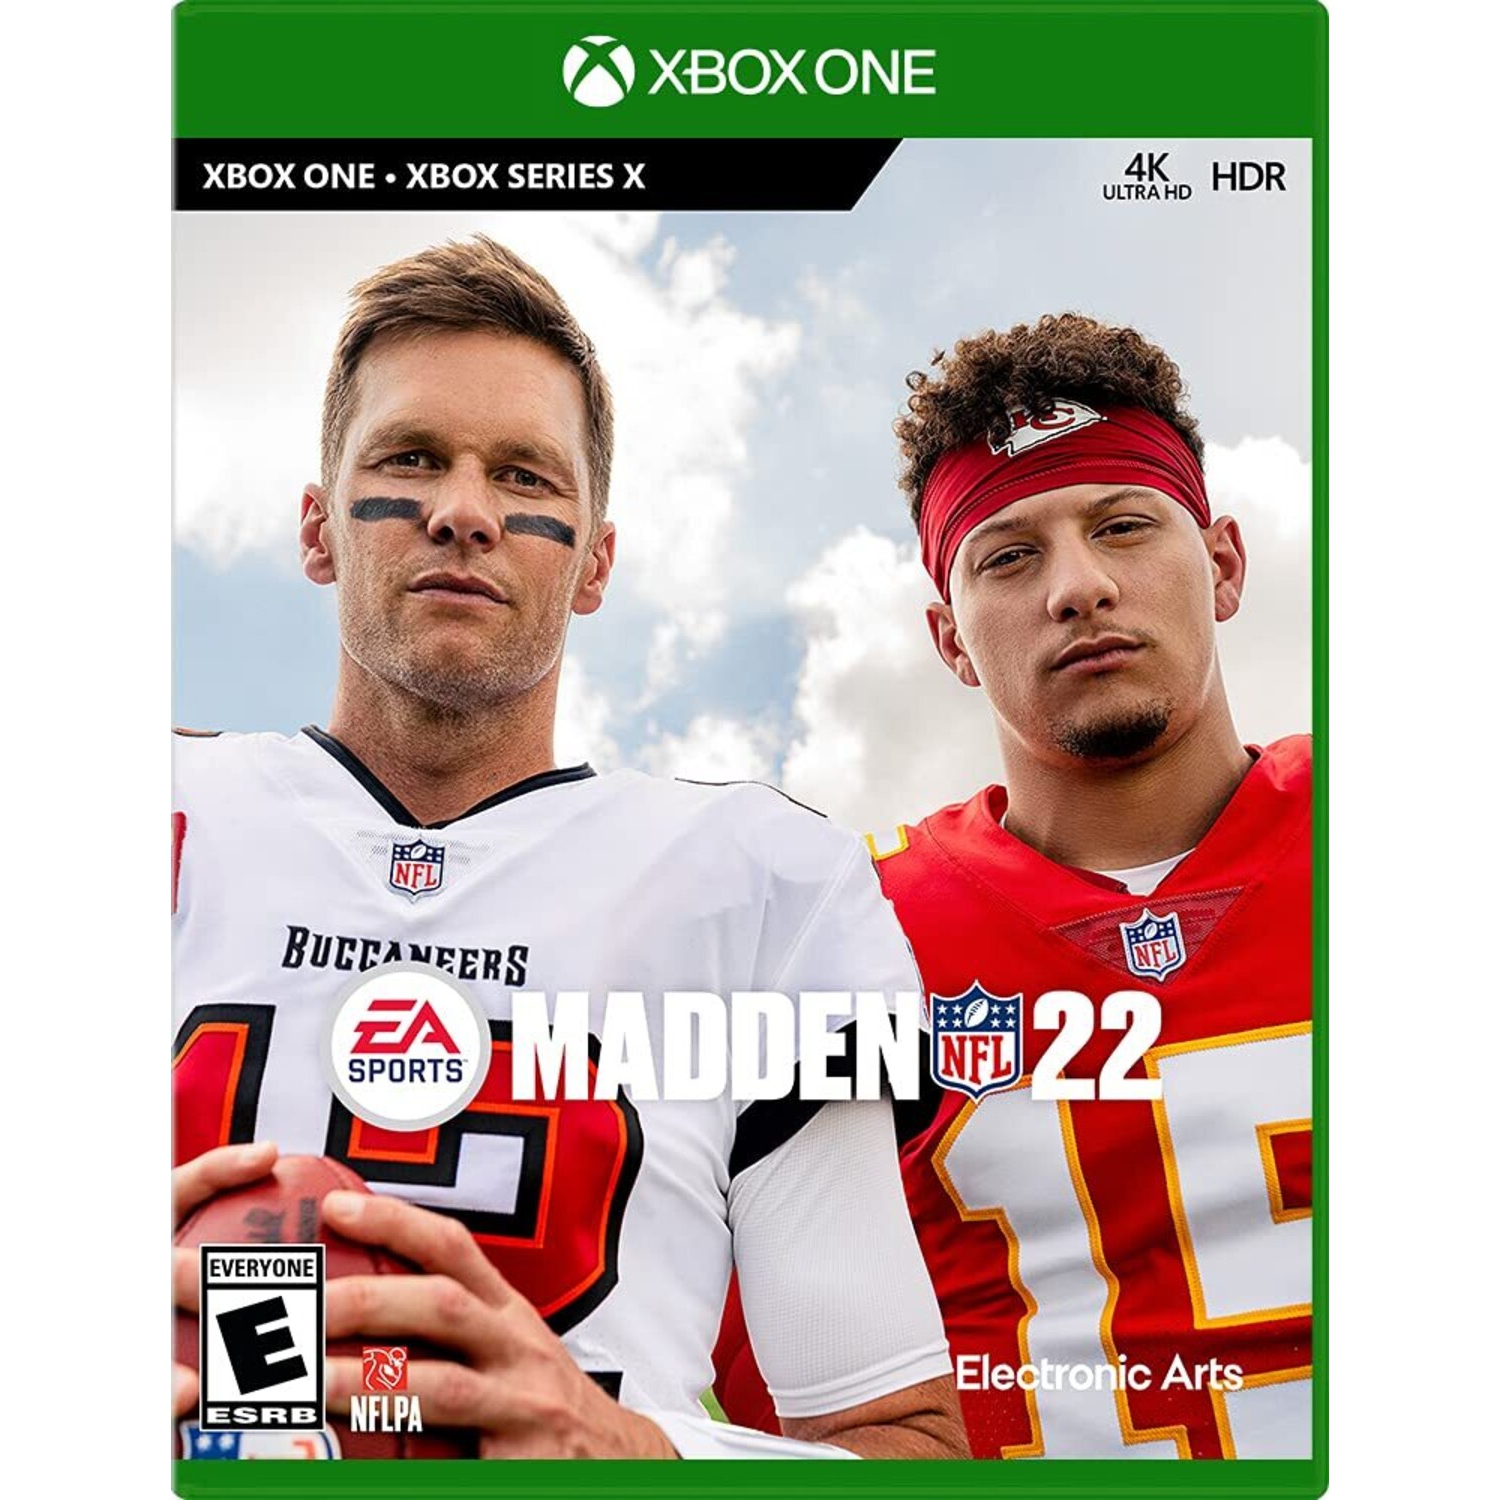 Madden NFL 22 for Xbox One and Xbox Series X [VIDEOGAMES] Xbox One